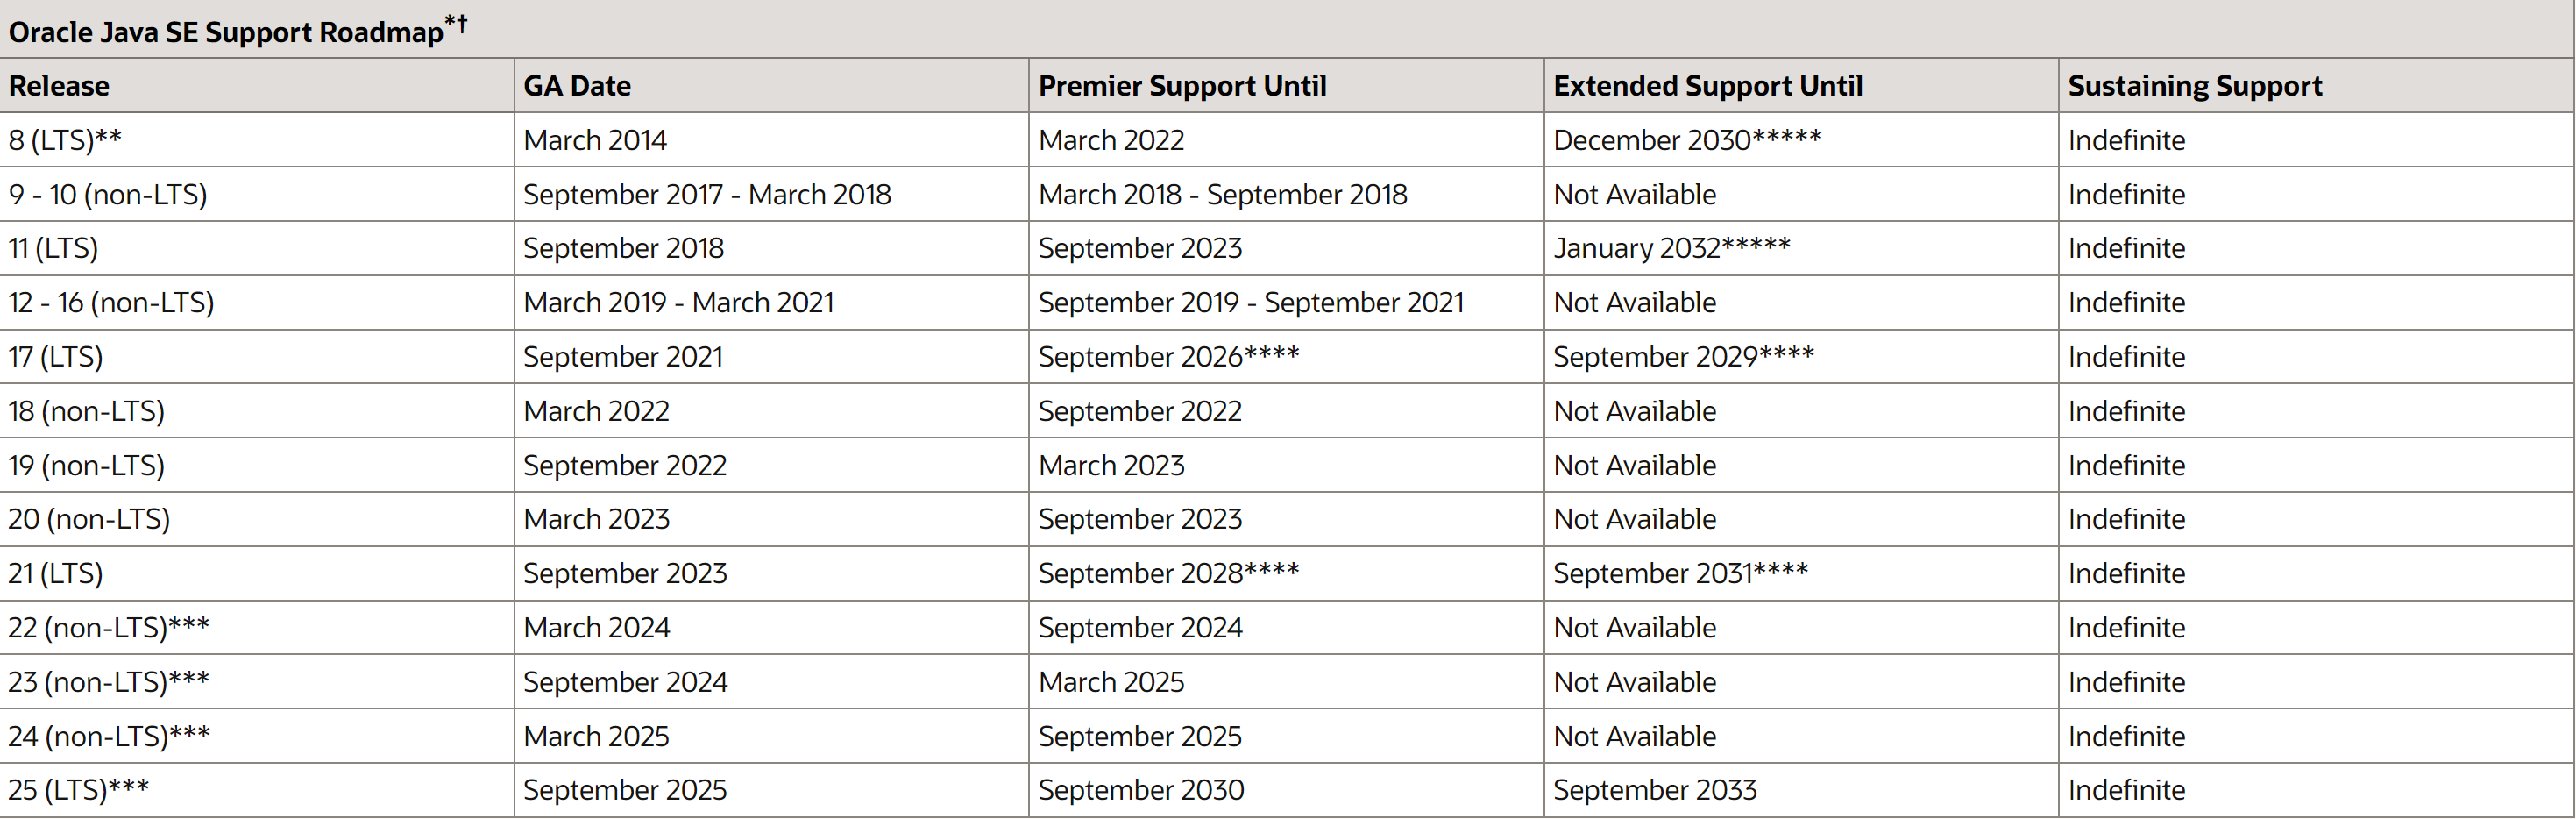 Oracle Java SE Support Roadmap